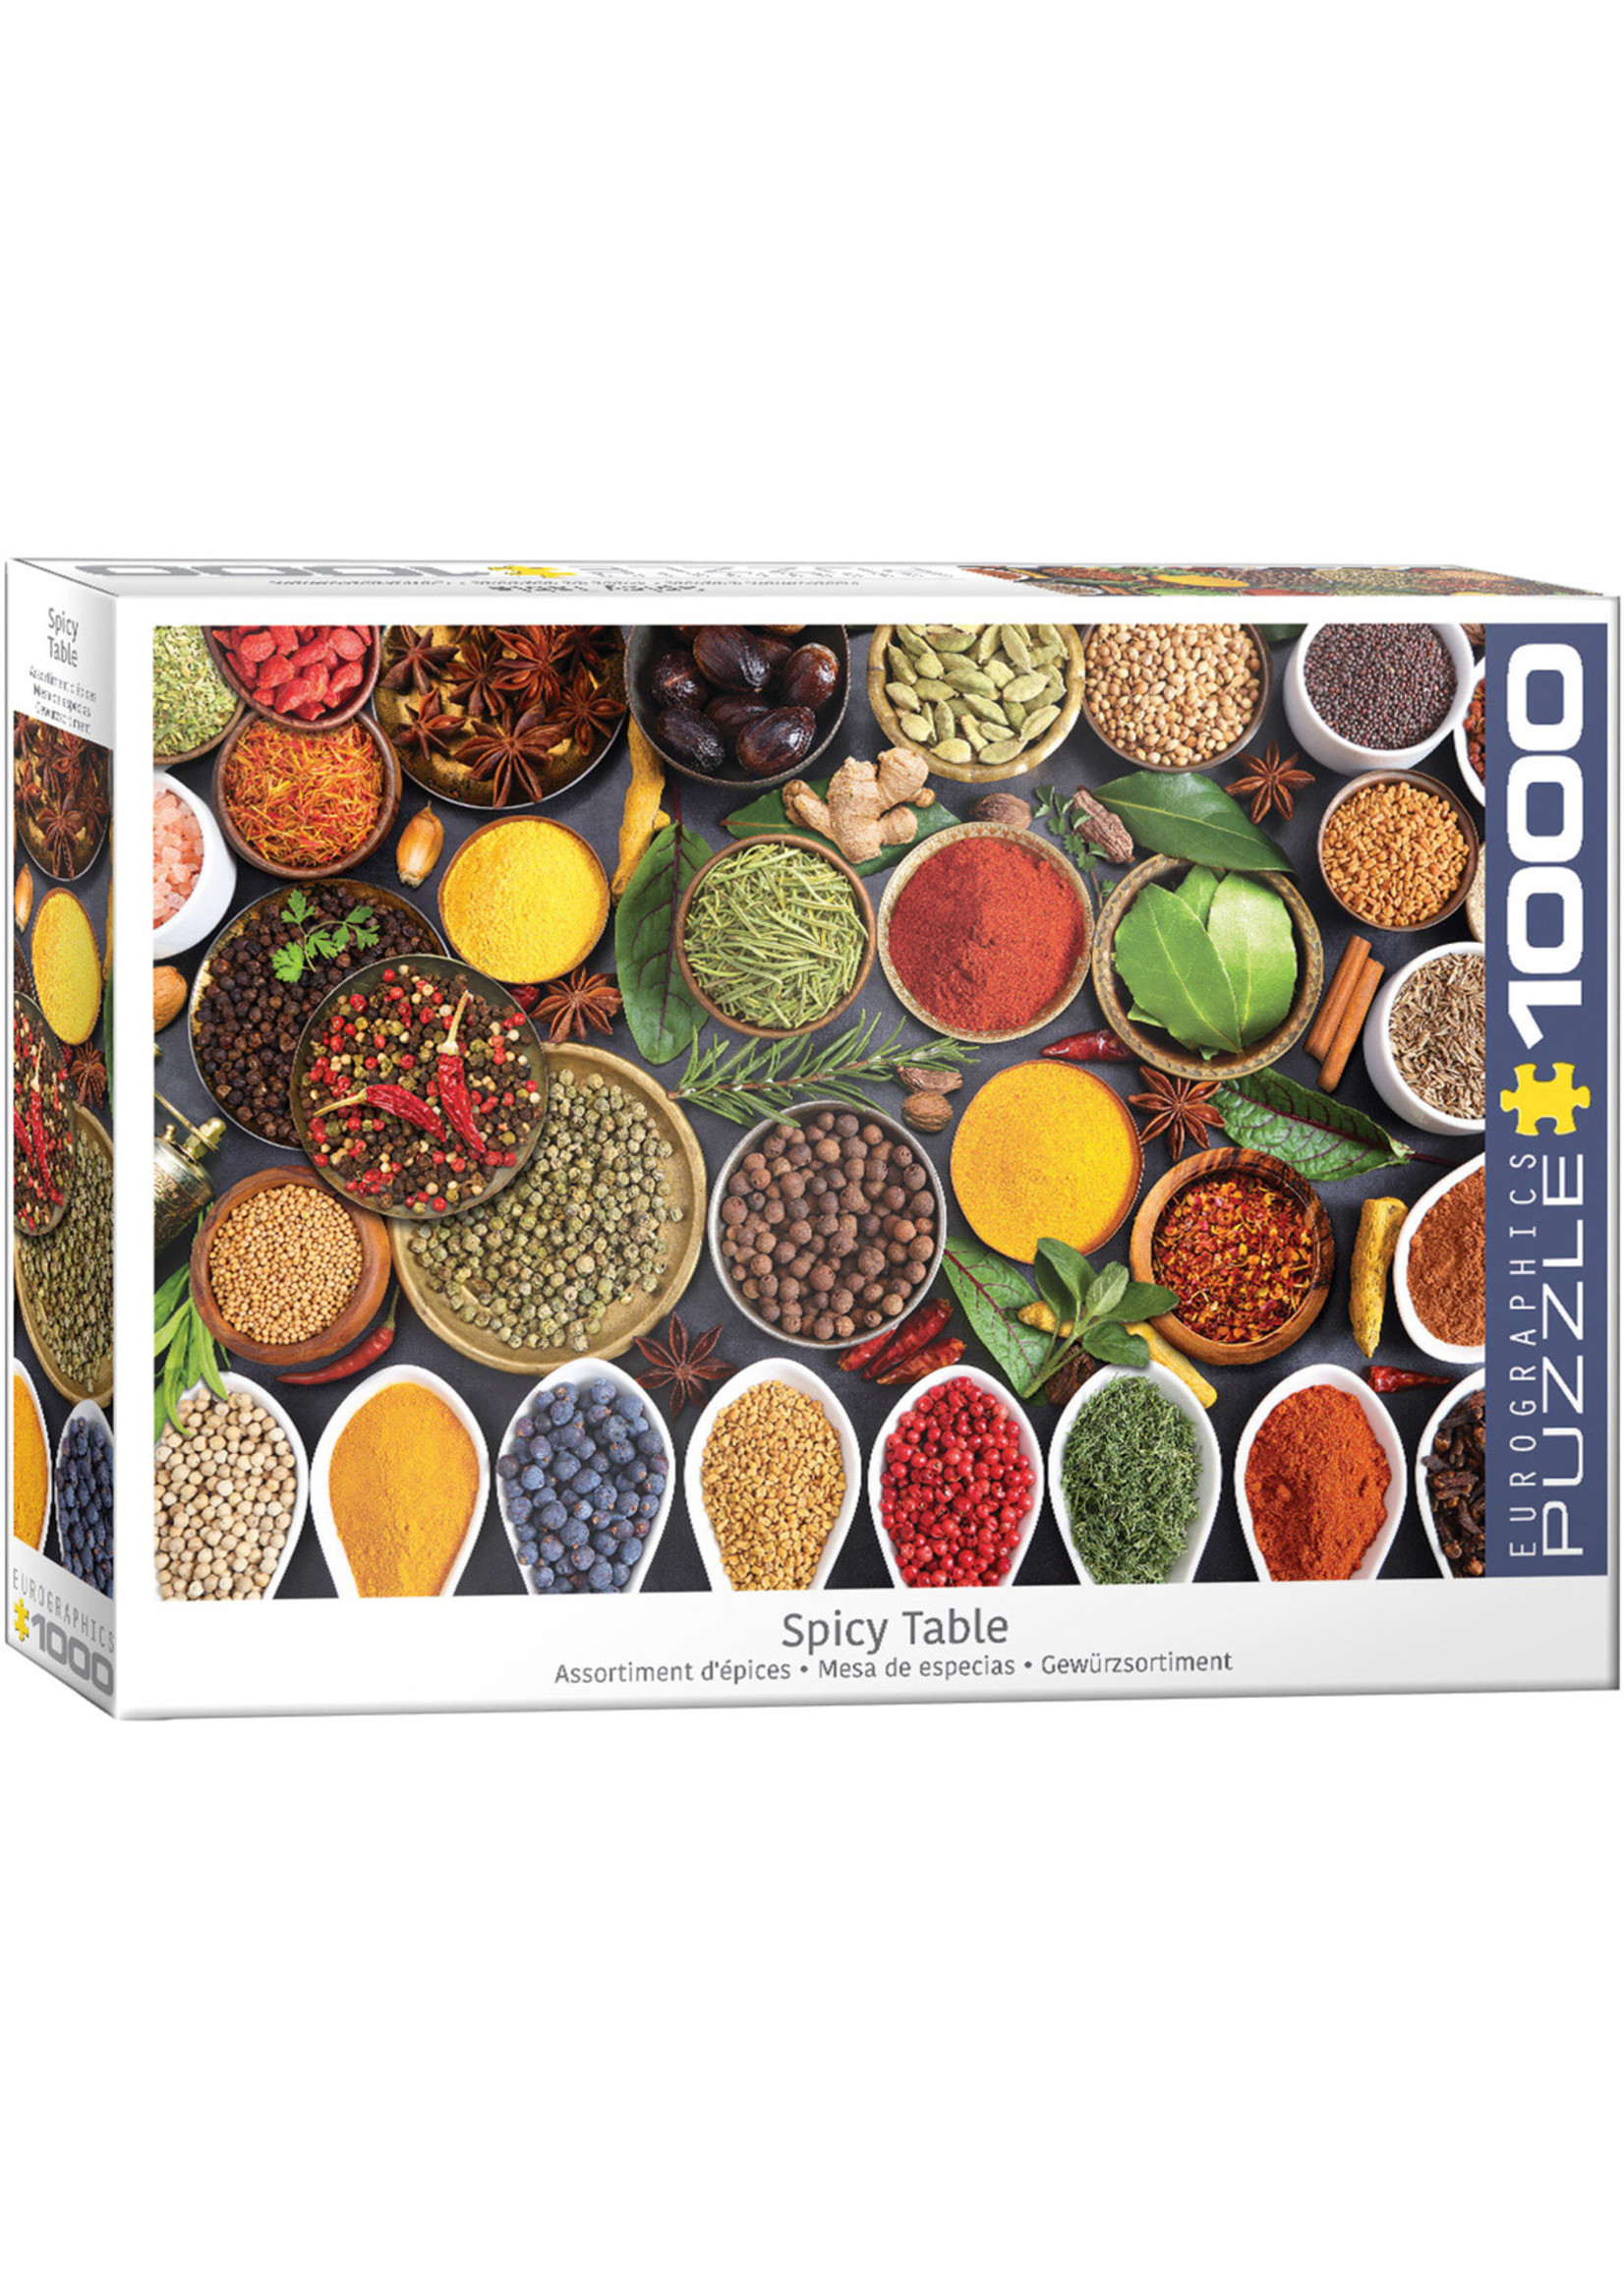 Eurographics Spicy Table - 1000 Piece Puzzle